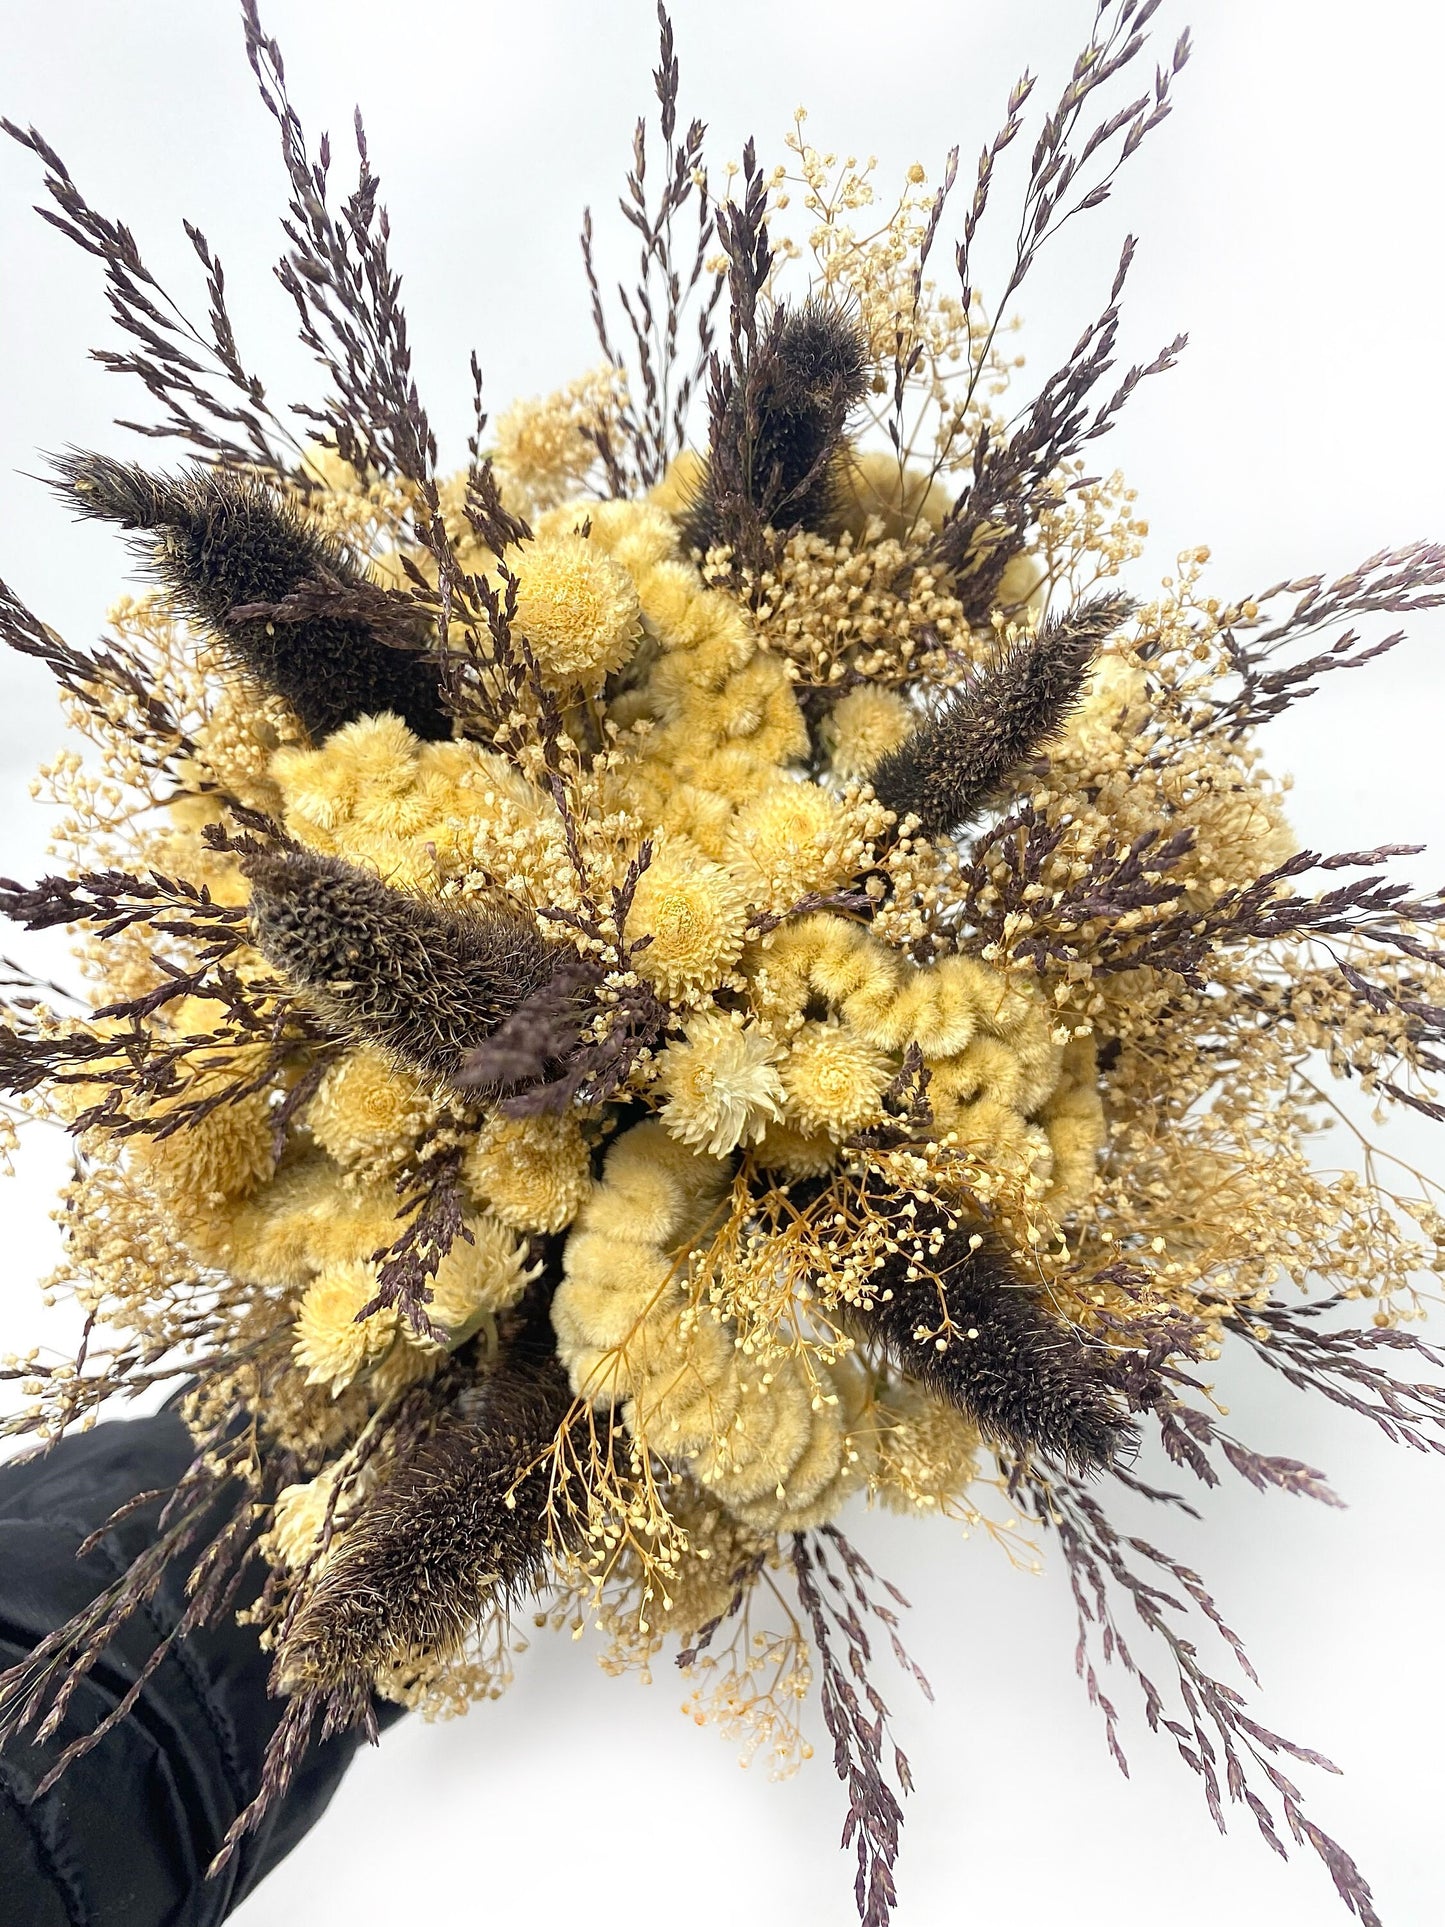 Fall Bouquet, Wedding Floral, Preserved Flowers, Cream, Coxcomb, Bridal, Rustic, Dark Purple, Natural, Throw Bouquet